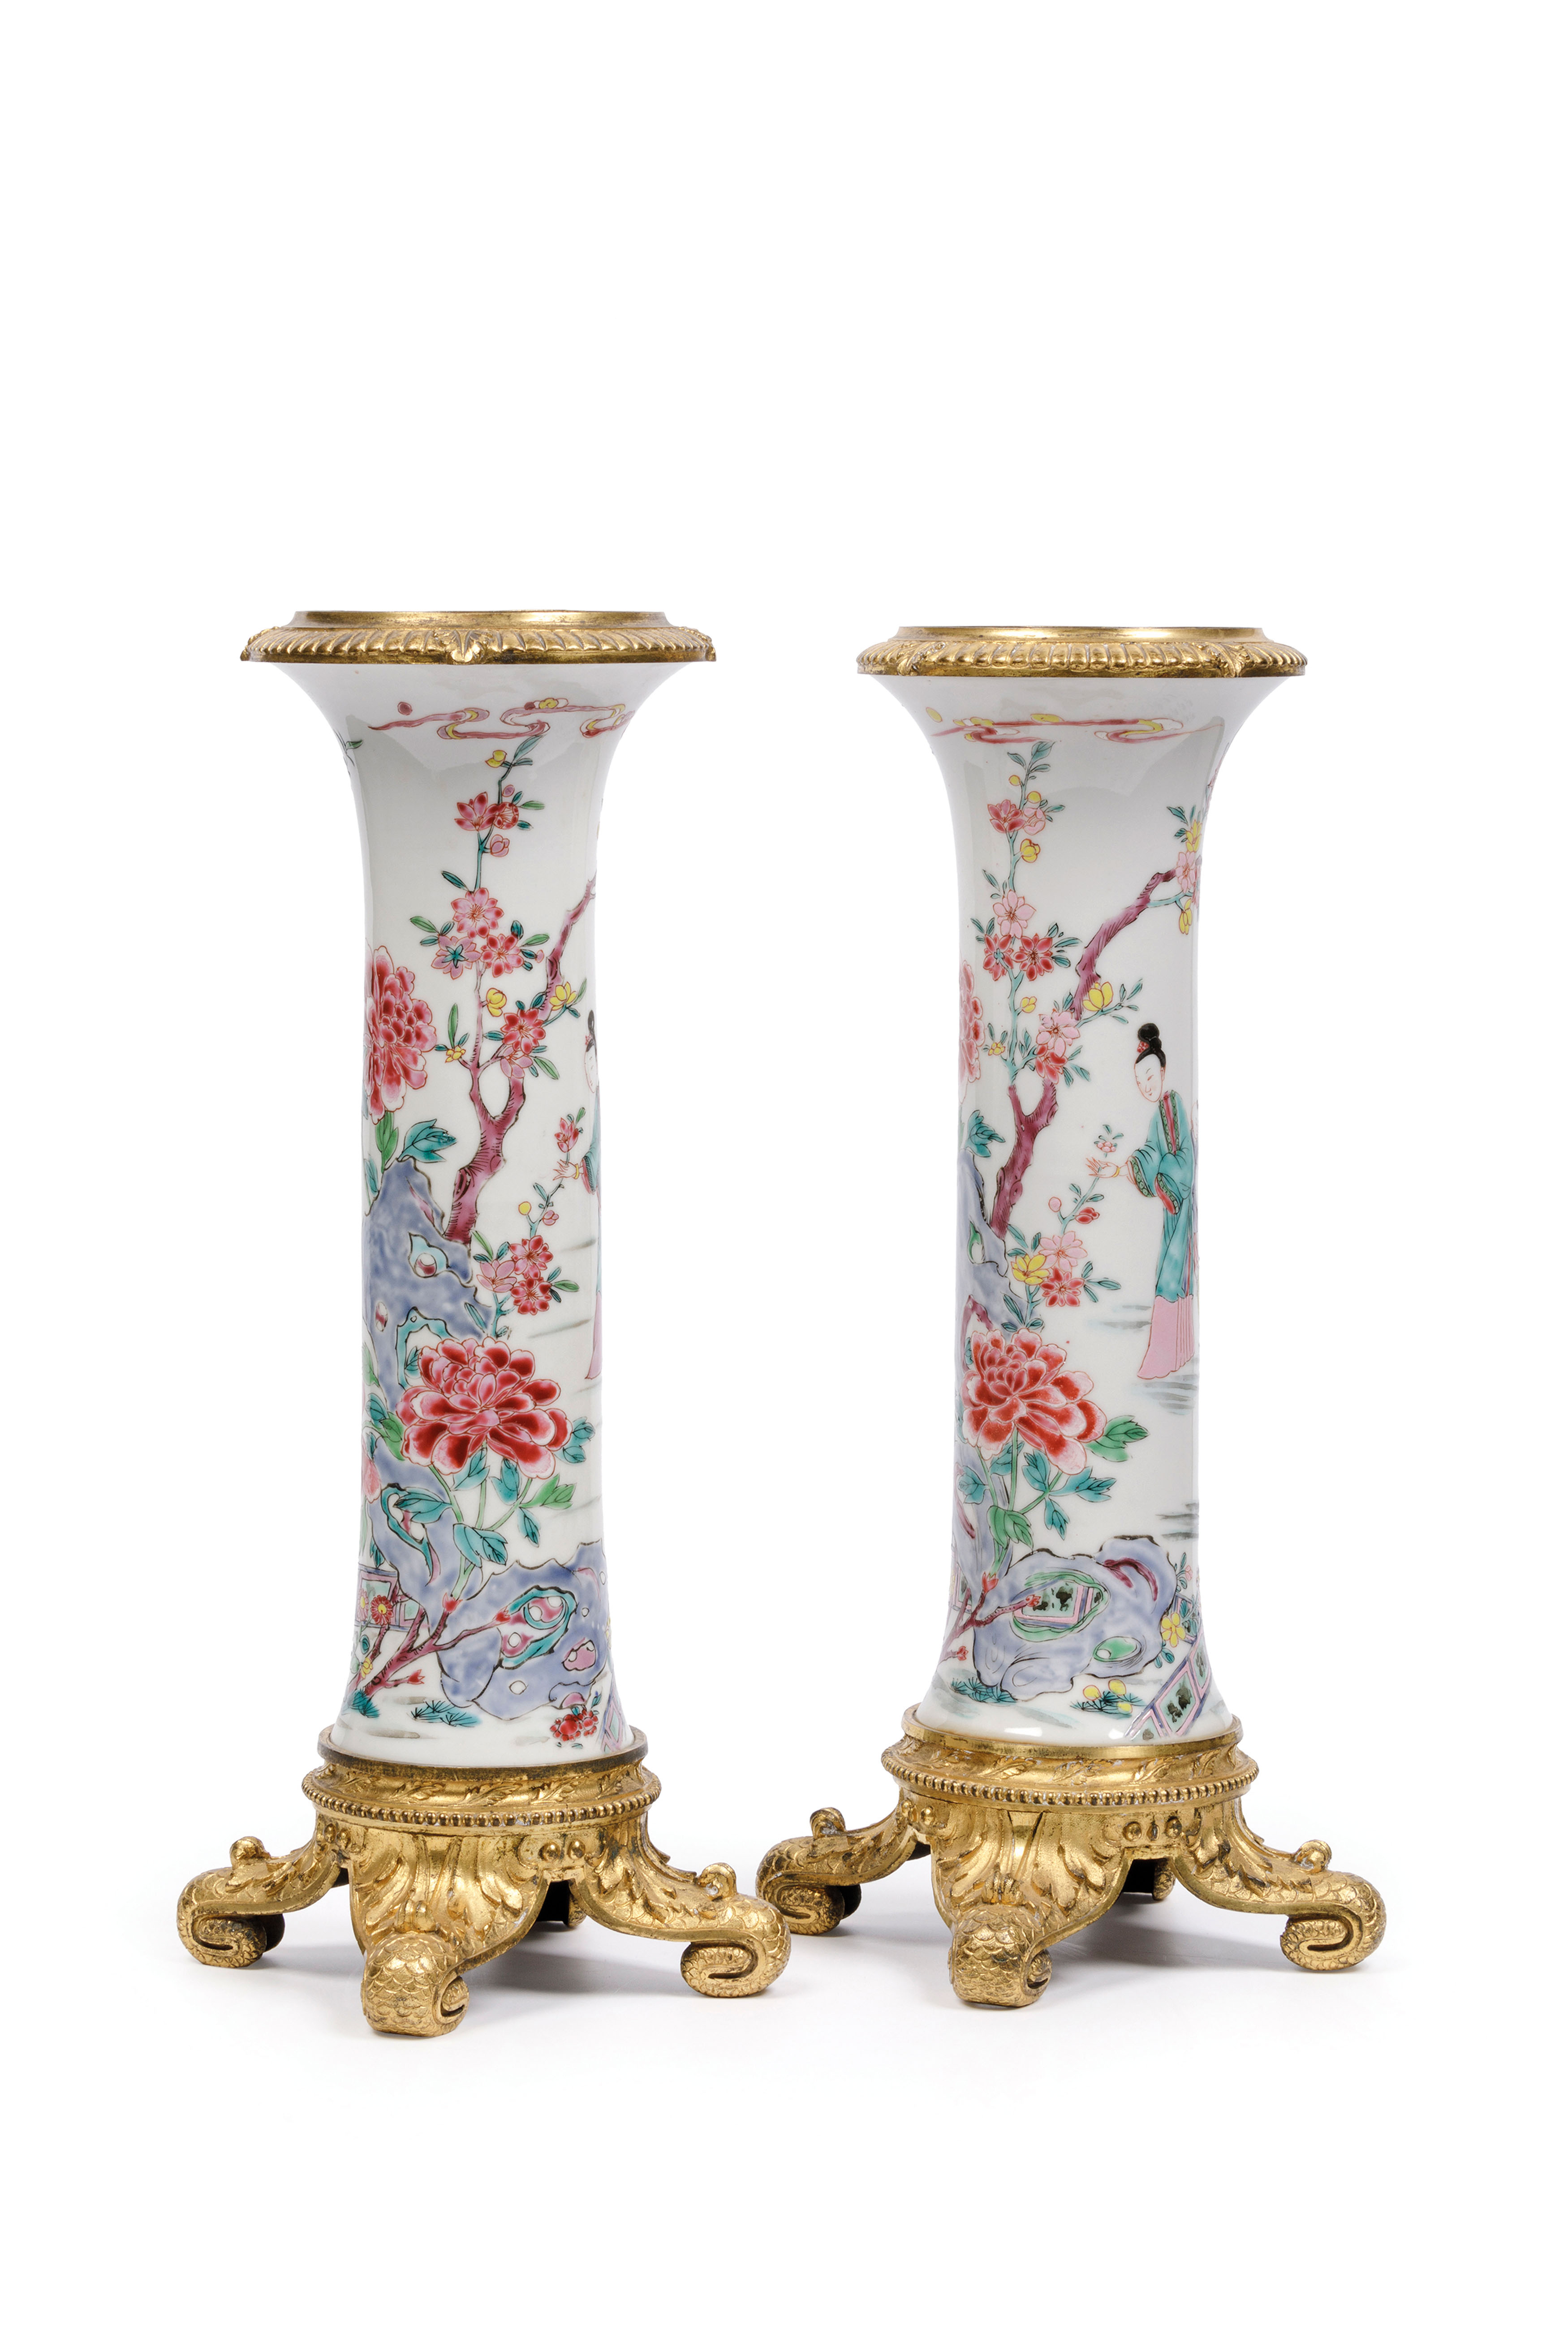 A PAIR OF FAMILLE ROSE PORCELAIN TRUMPET VASES, CHINA, 18TH CENTURY, WITH EUROPEAN BRONZE MOUNT - Image 3 of 4